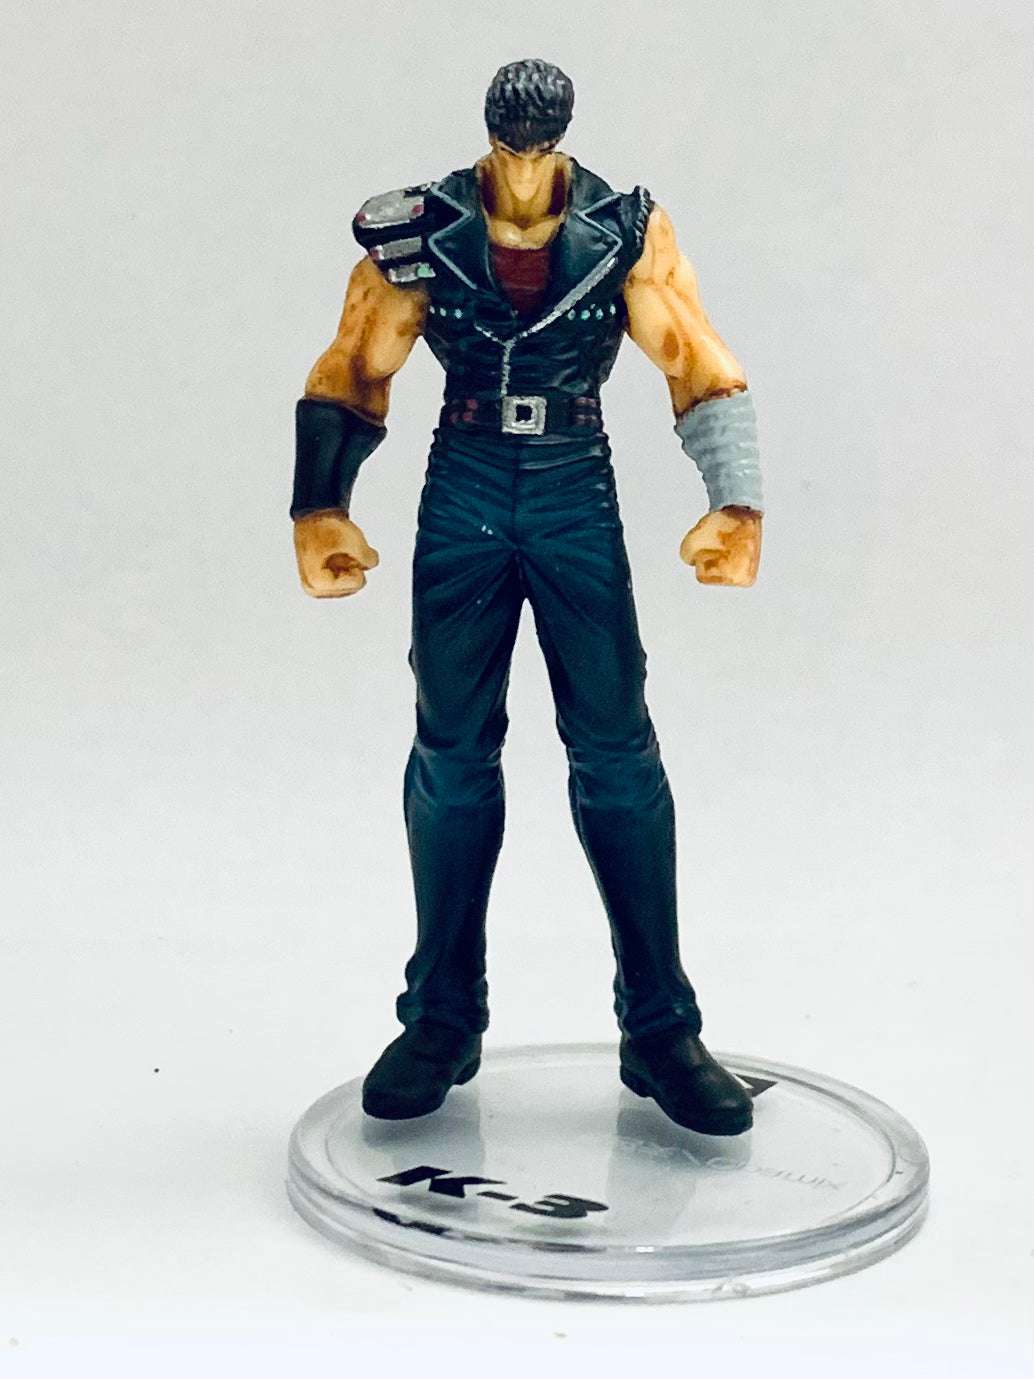 Hokuto no Ken - Kenshirou - Fist of the North Star All-Star Retsuden Capsule Figure Collection Part 1 - Repainted ver. 2